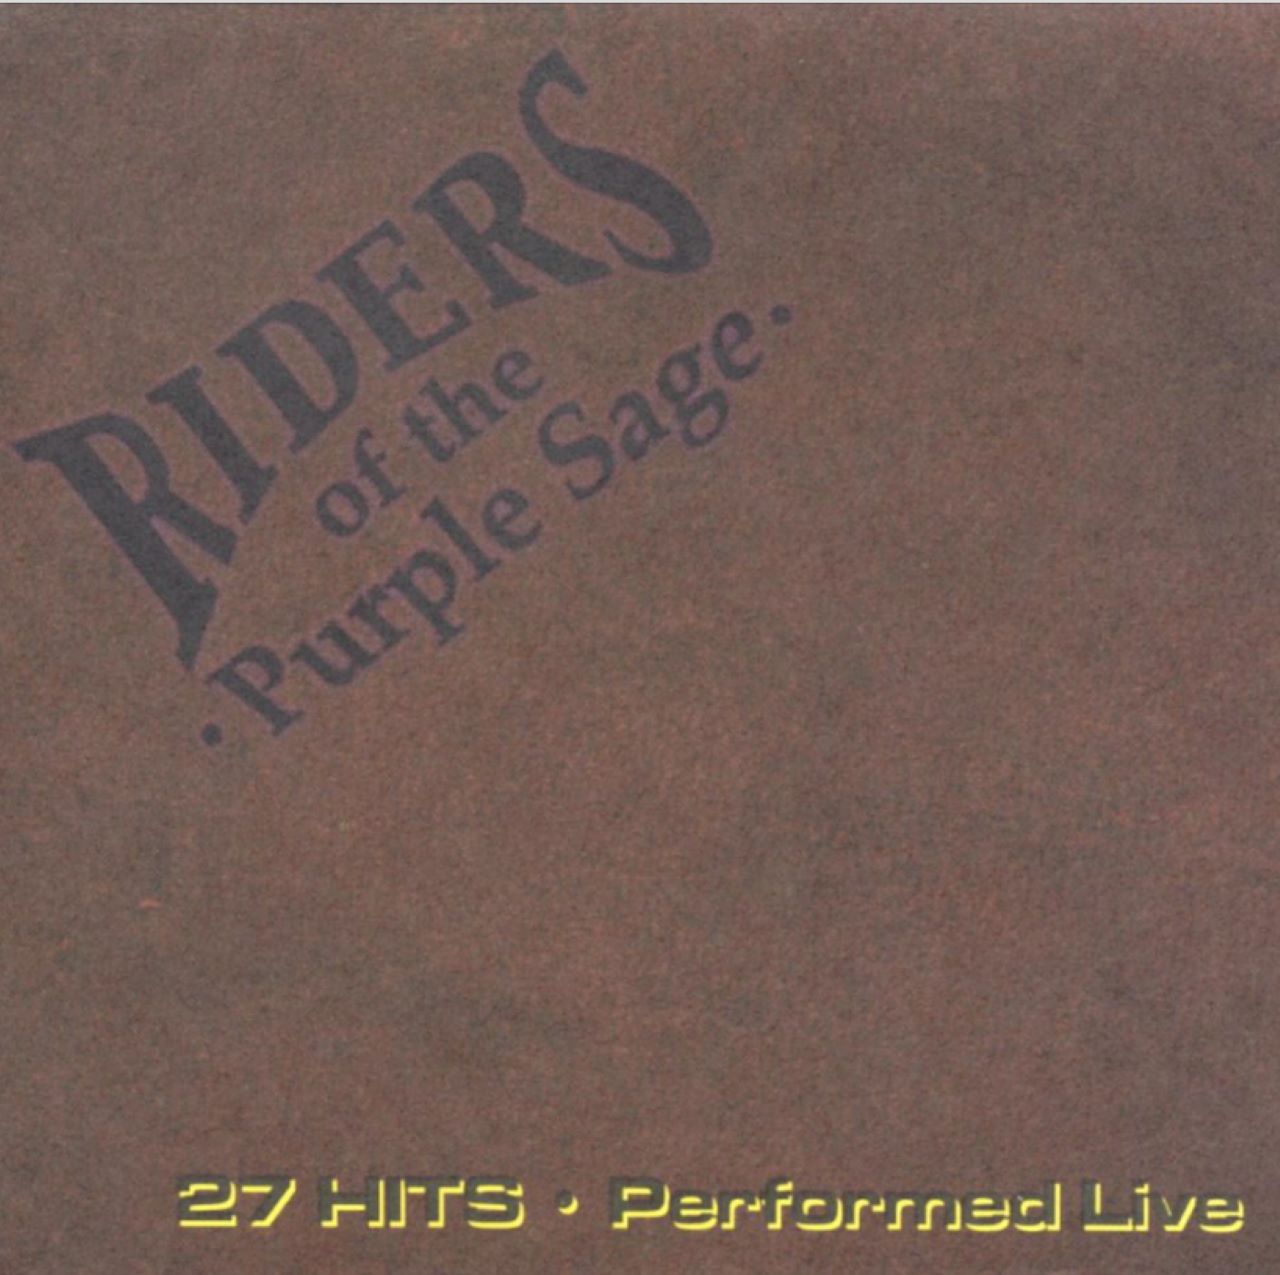 Riders Of The Purple Sage – 27 Hits Performed Live cover album